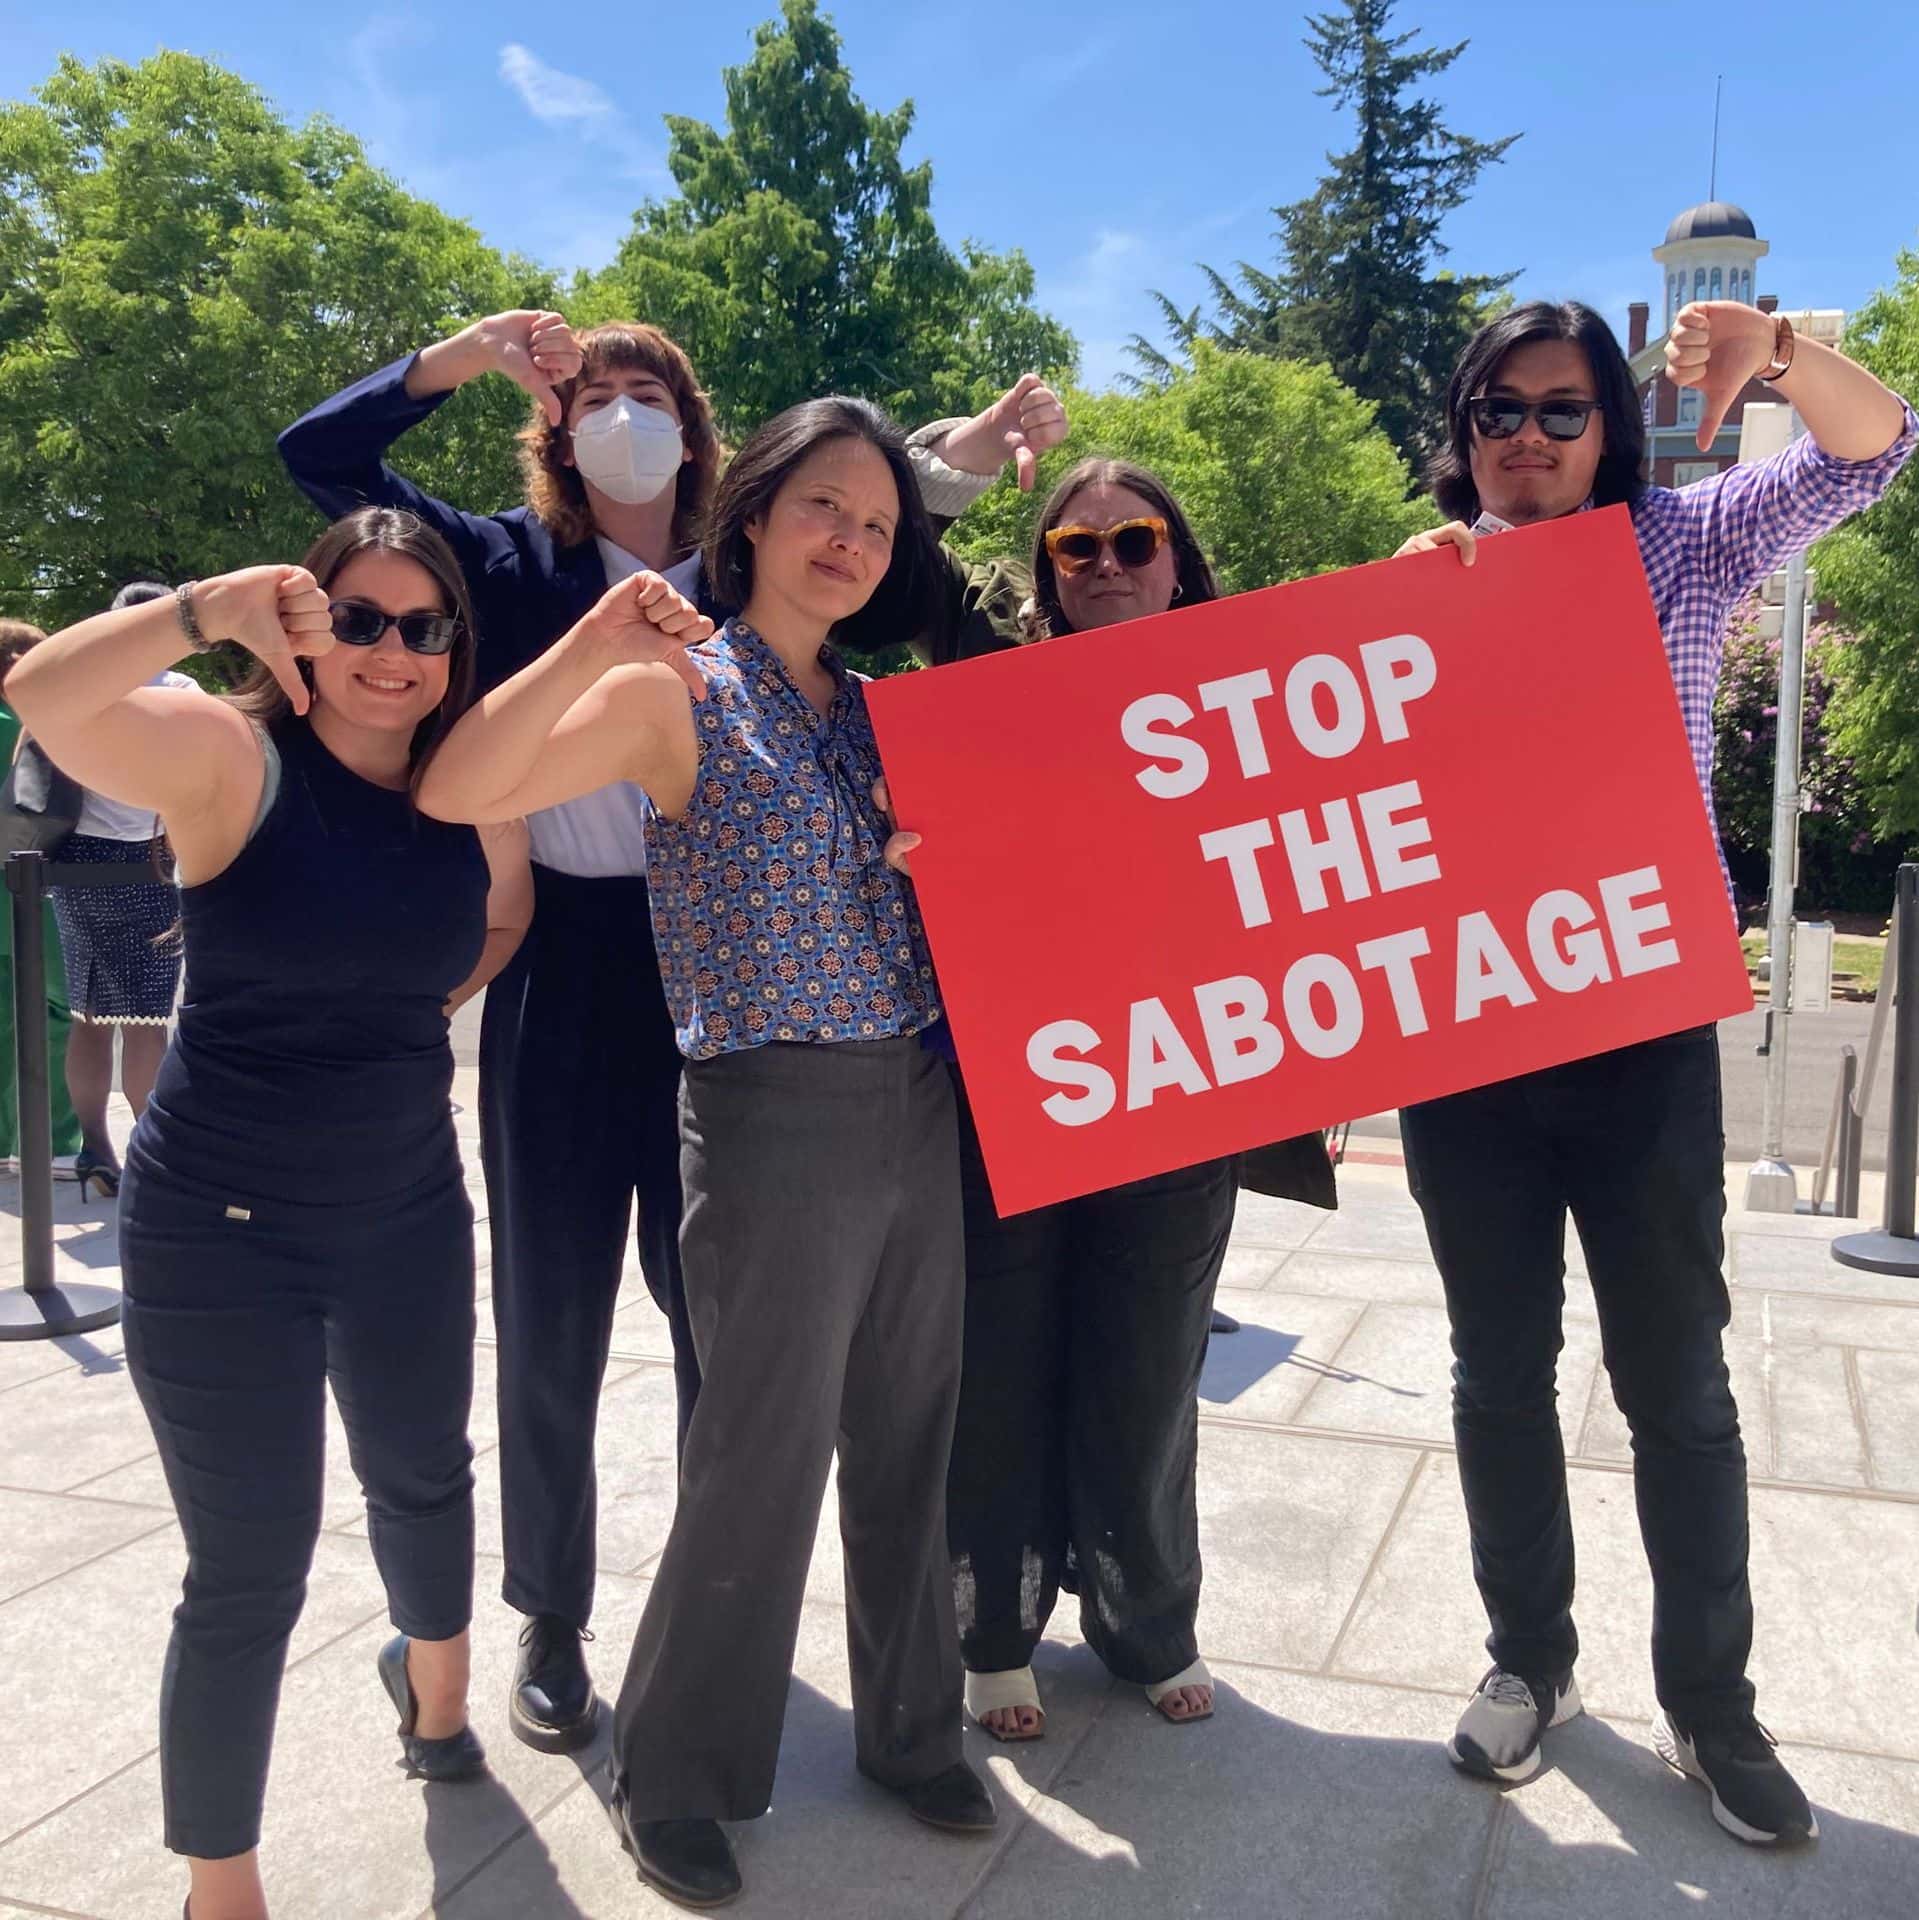 A group of people are posed while holding a sign that reads "Stop the Sabotage." They are all giving the thumbs-down gesture